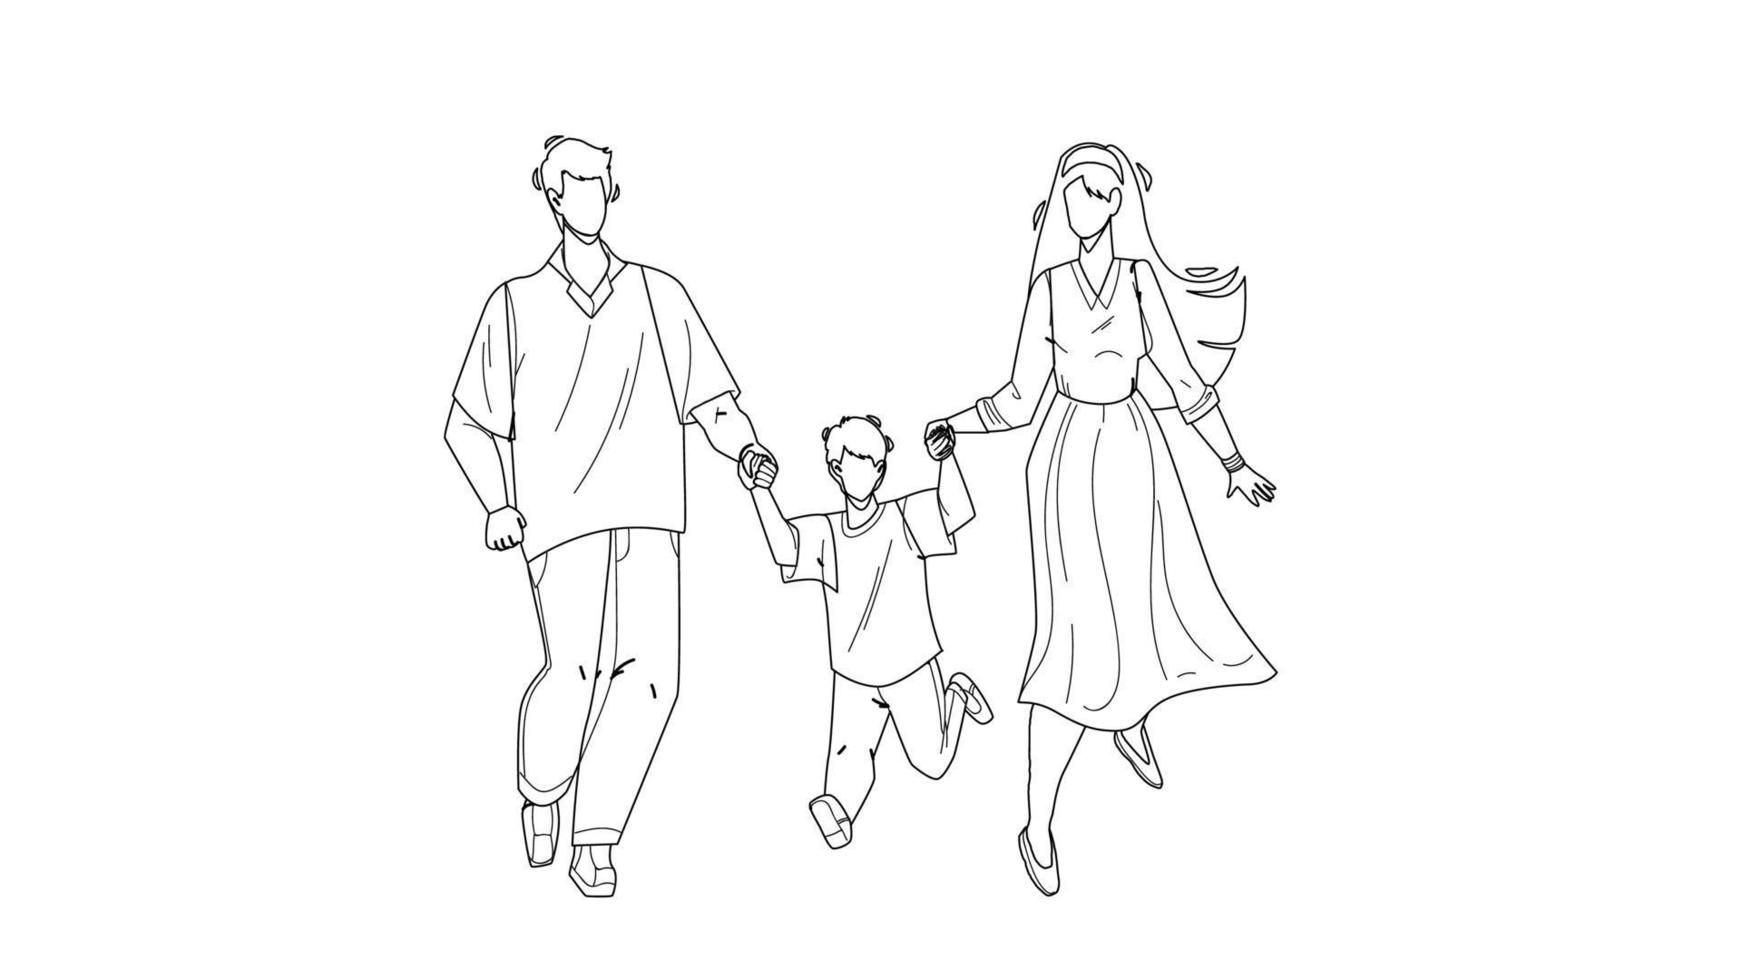 Healthy Family Walking Together Outdoor Vector Illustration